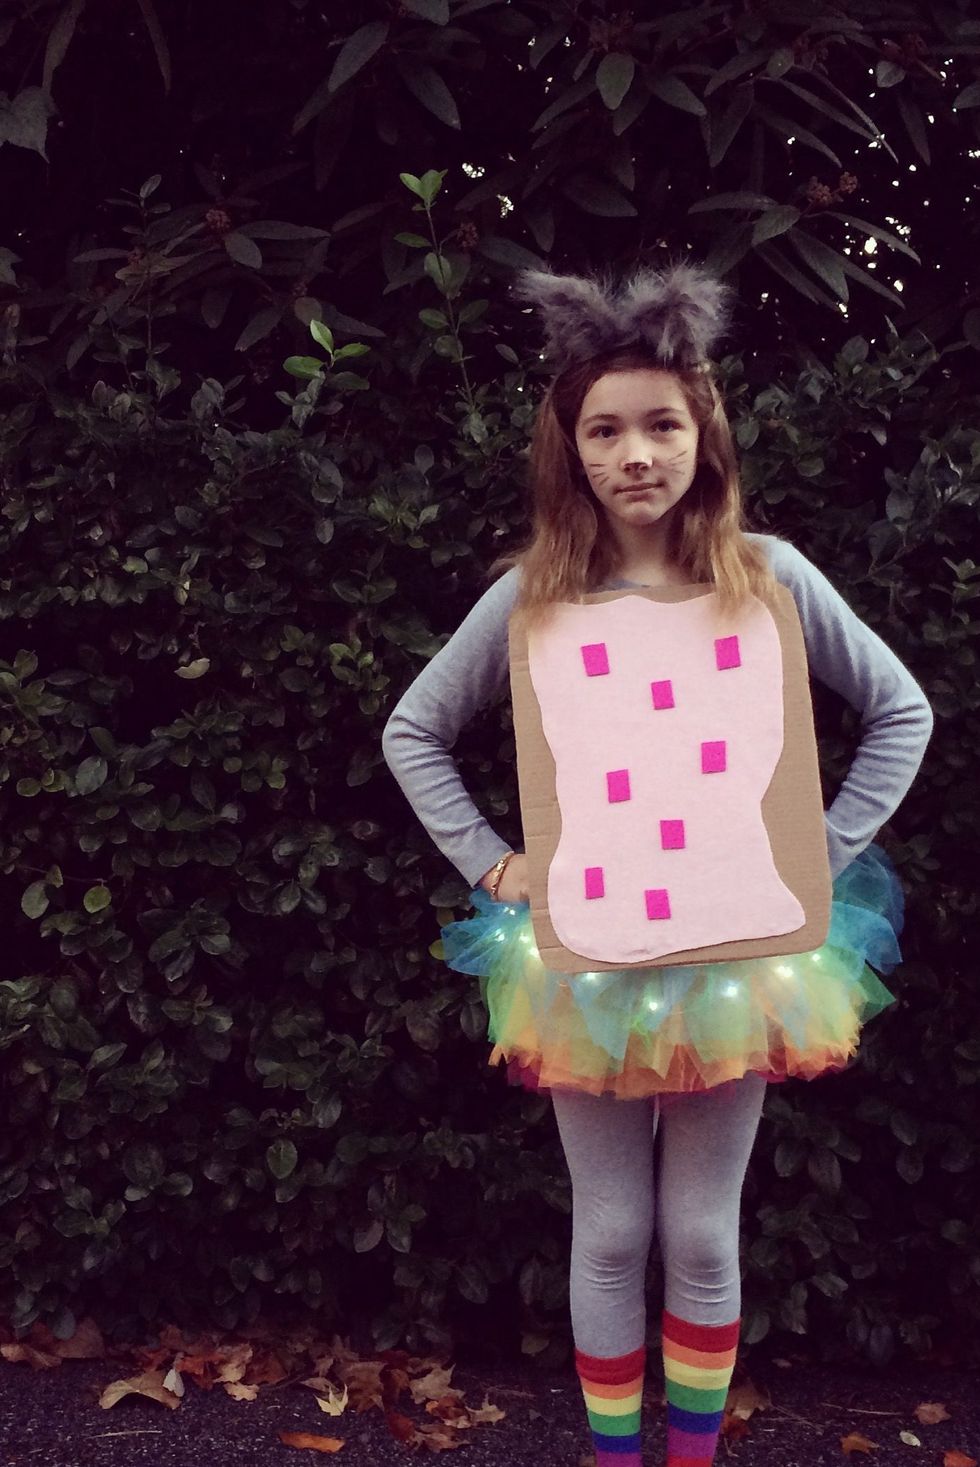 12 or 13 year old tween girl wearing halloween costume inspired by nyan cat meme with rainbow tutu and cardboard poptart top